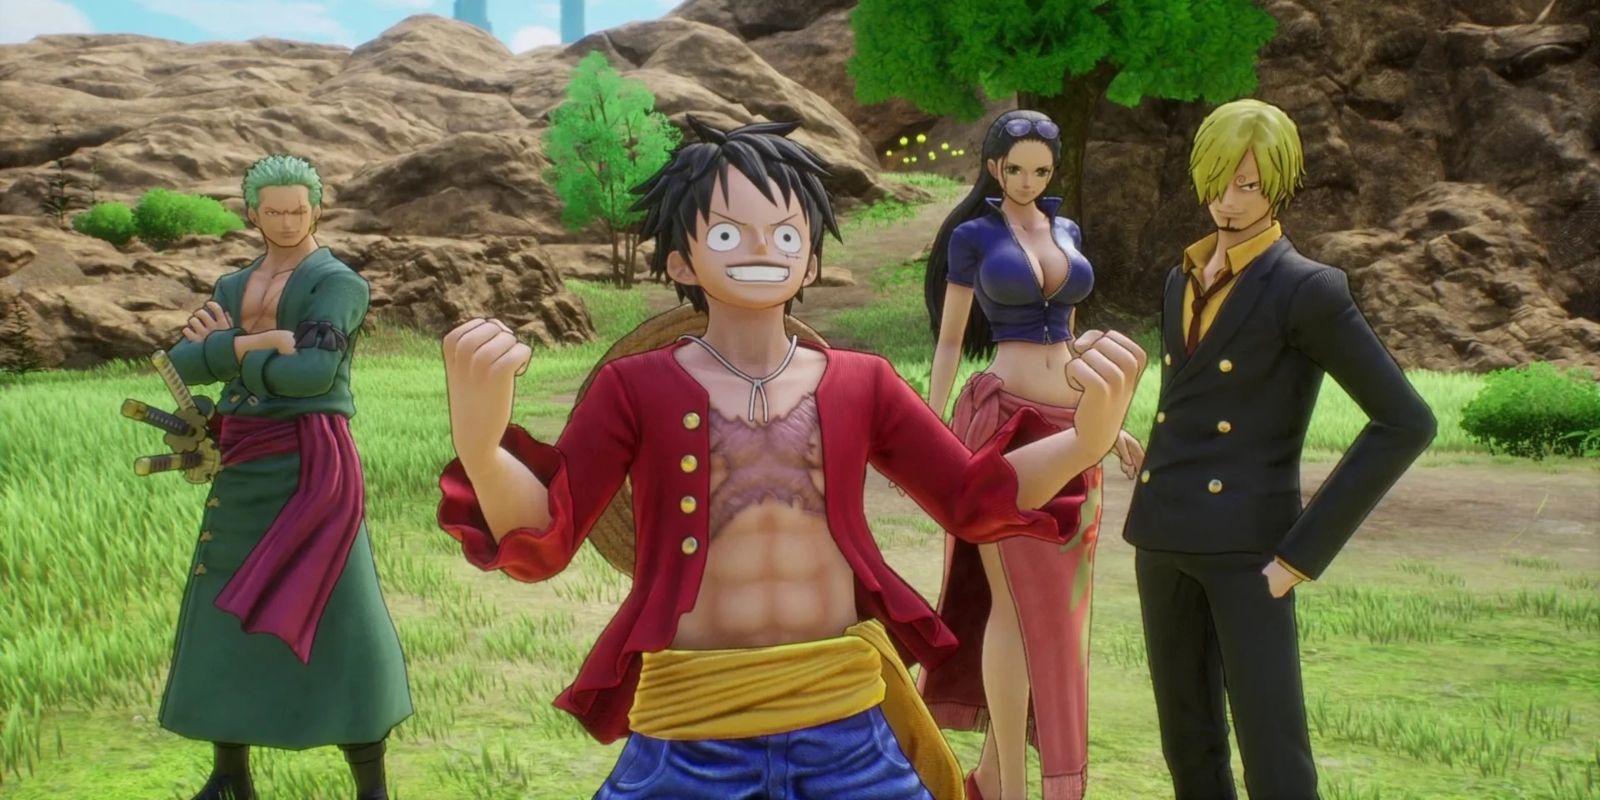 ONE PIECE ODYSSEY - The full story of Marineford